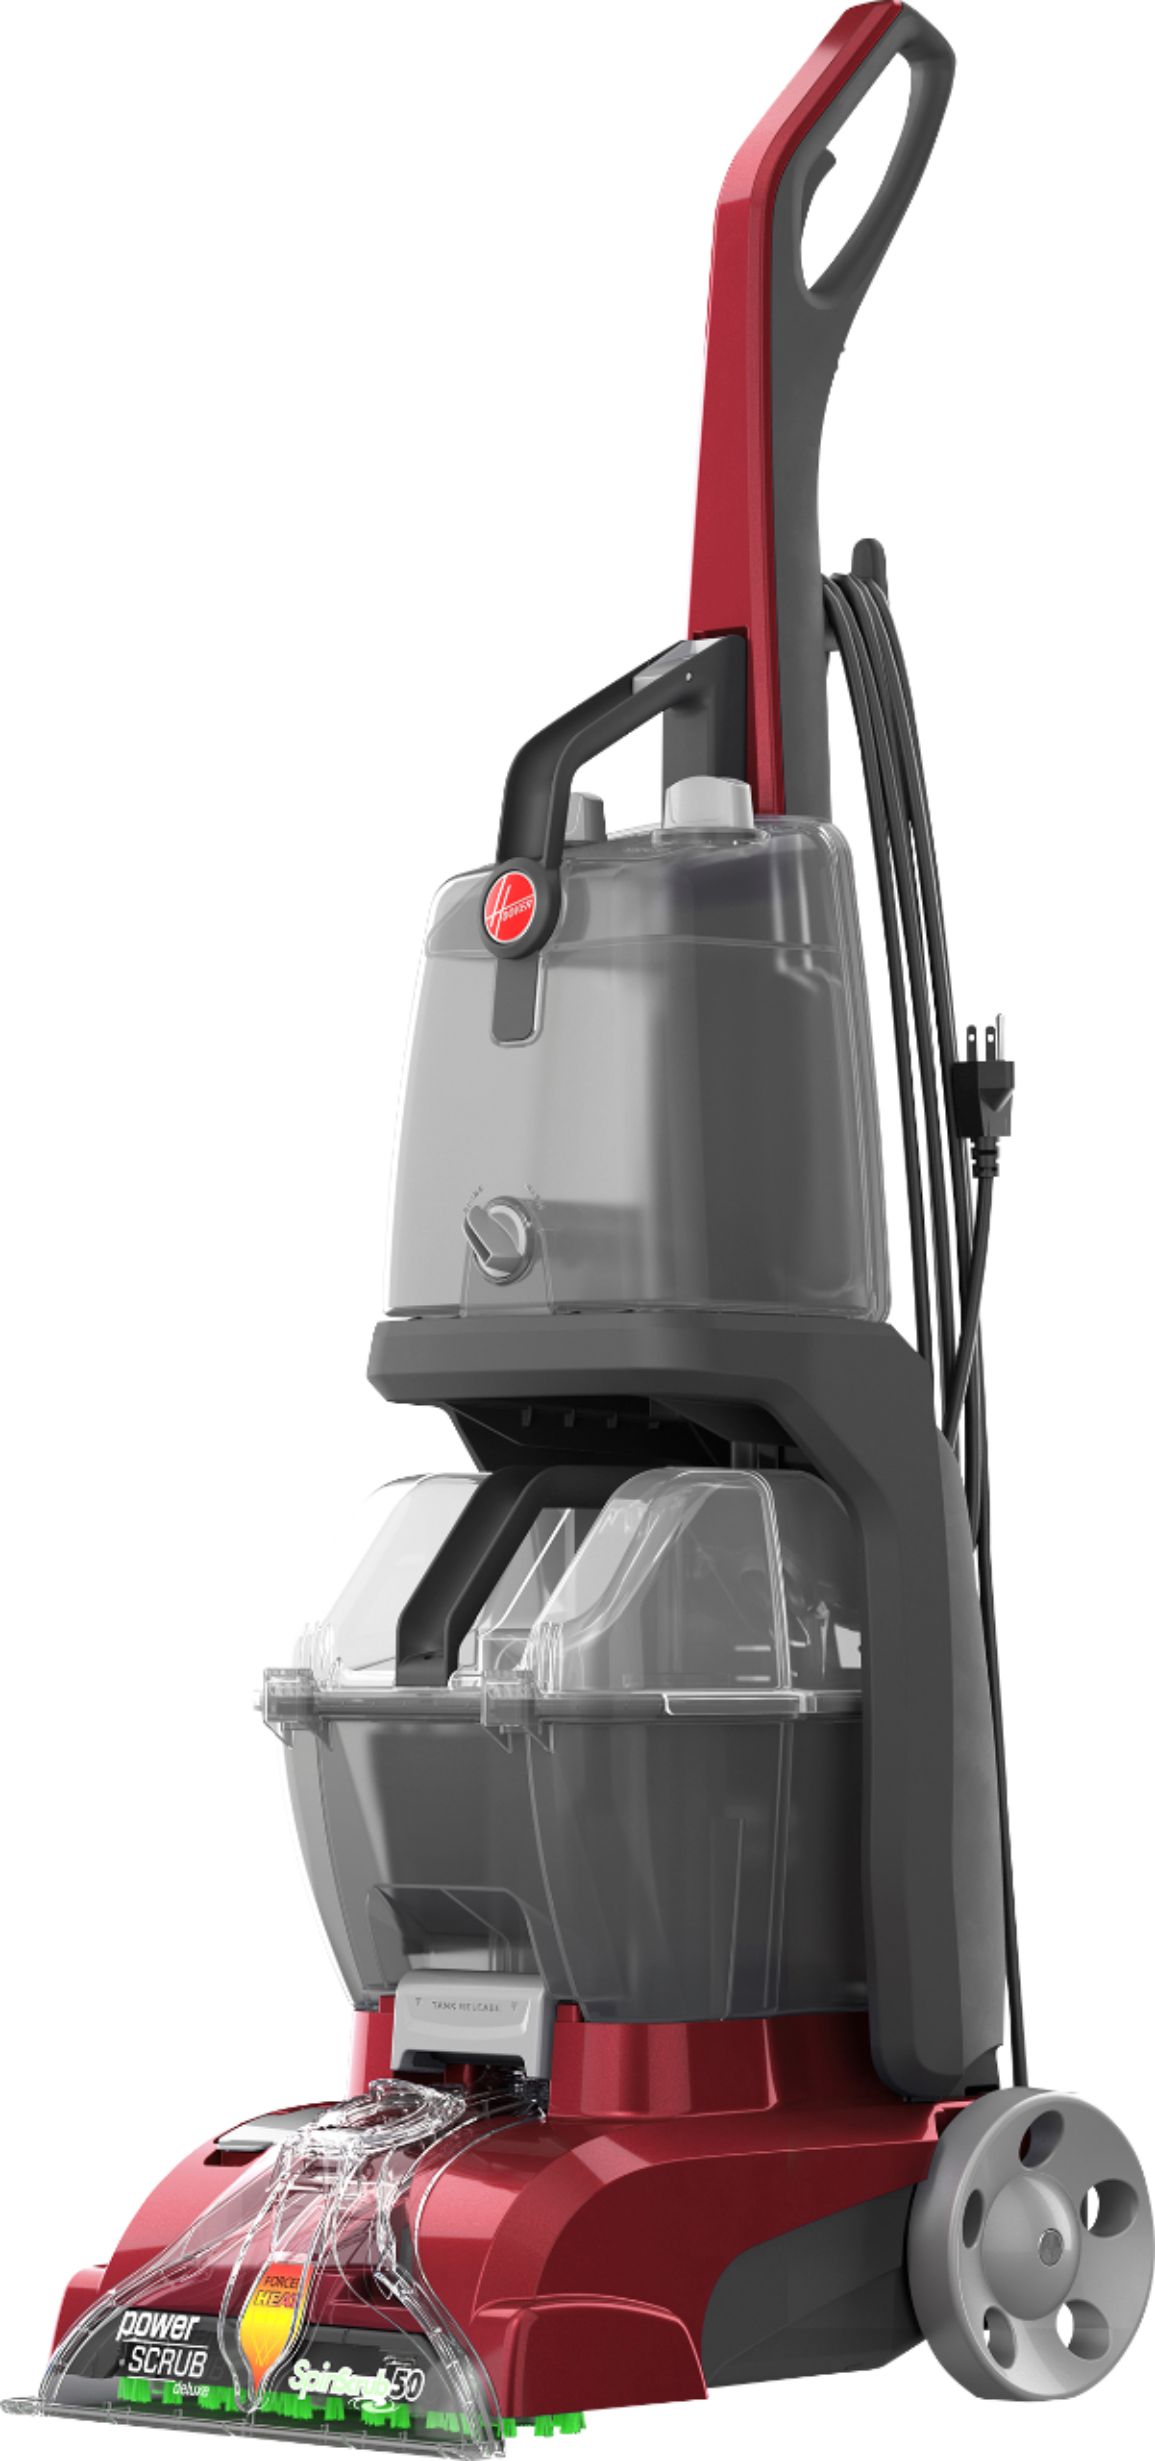 FH50150 Re Upright Shampooer Hoover Power Scrub Deluxe Carpet Cleaner Machine 